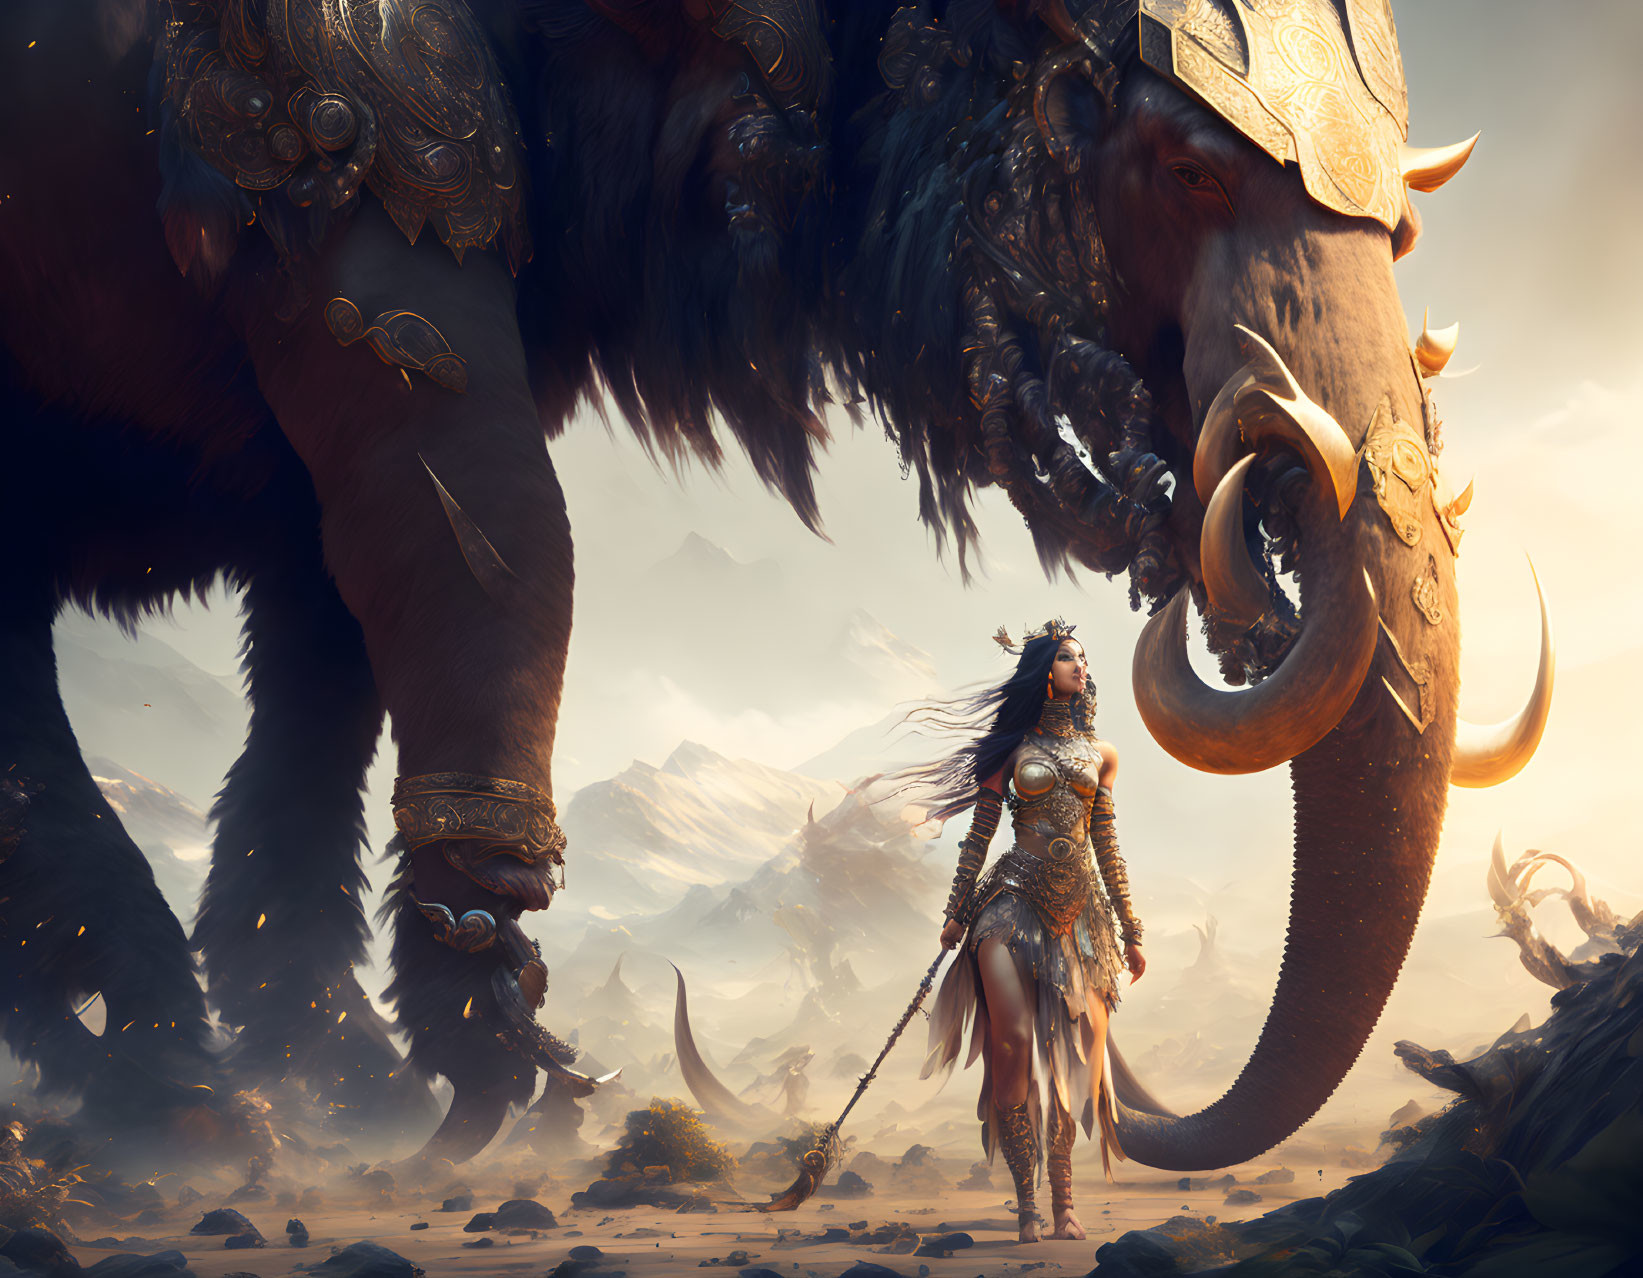 Warrior woman and ornate elephant in misty mountain landscape